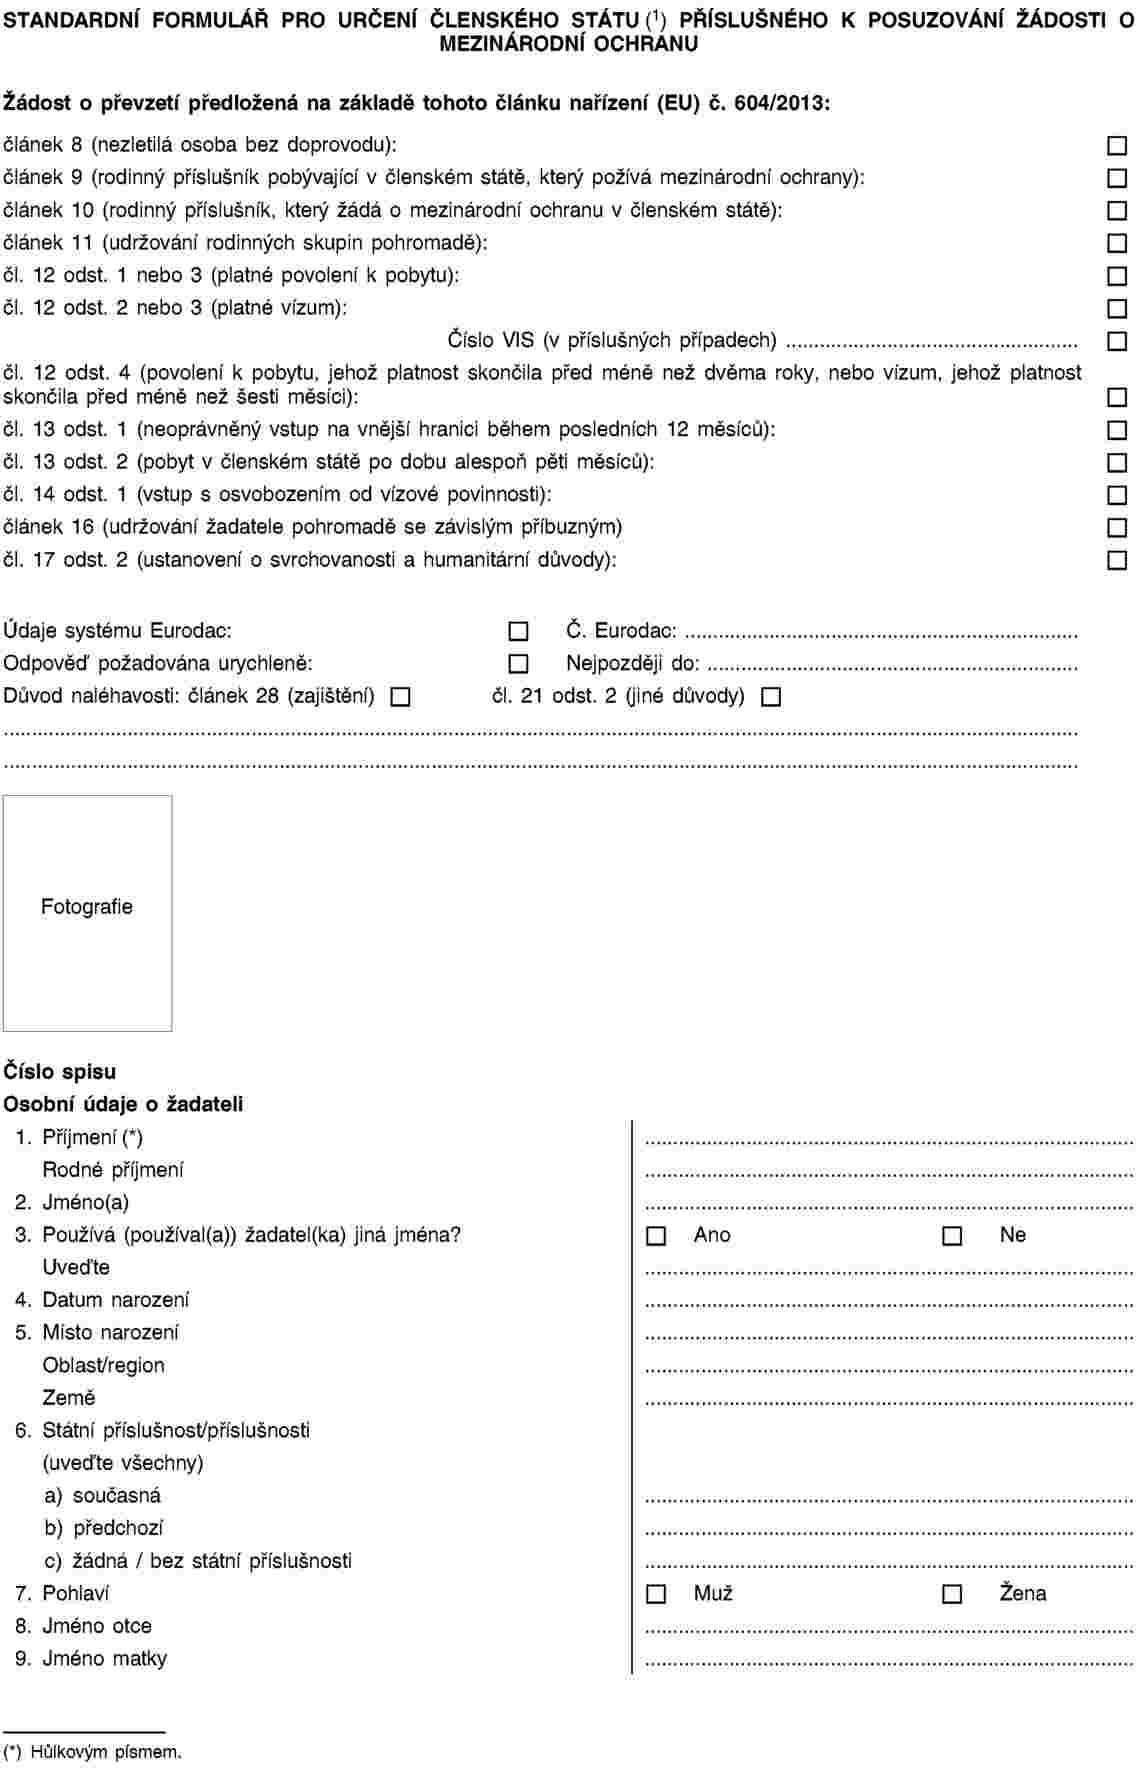 Constitution Usa Episode 1 Worksheet Answers  Briefencounters With Regard To Constitution Usa Episode 1 Worksheet Answers